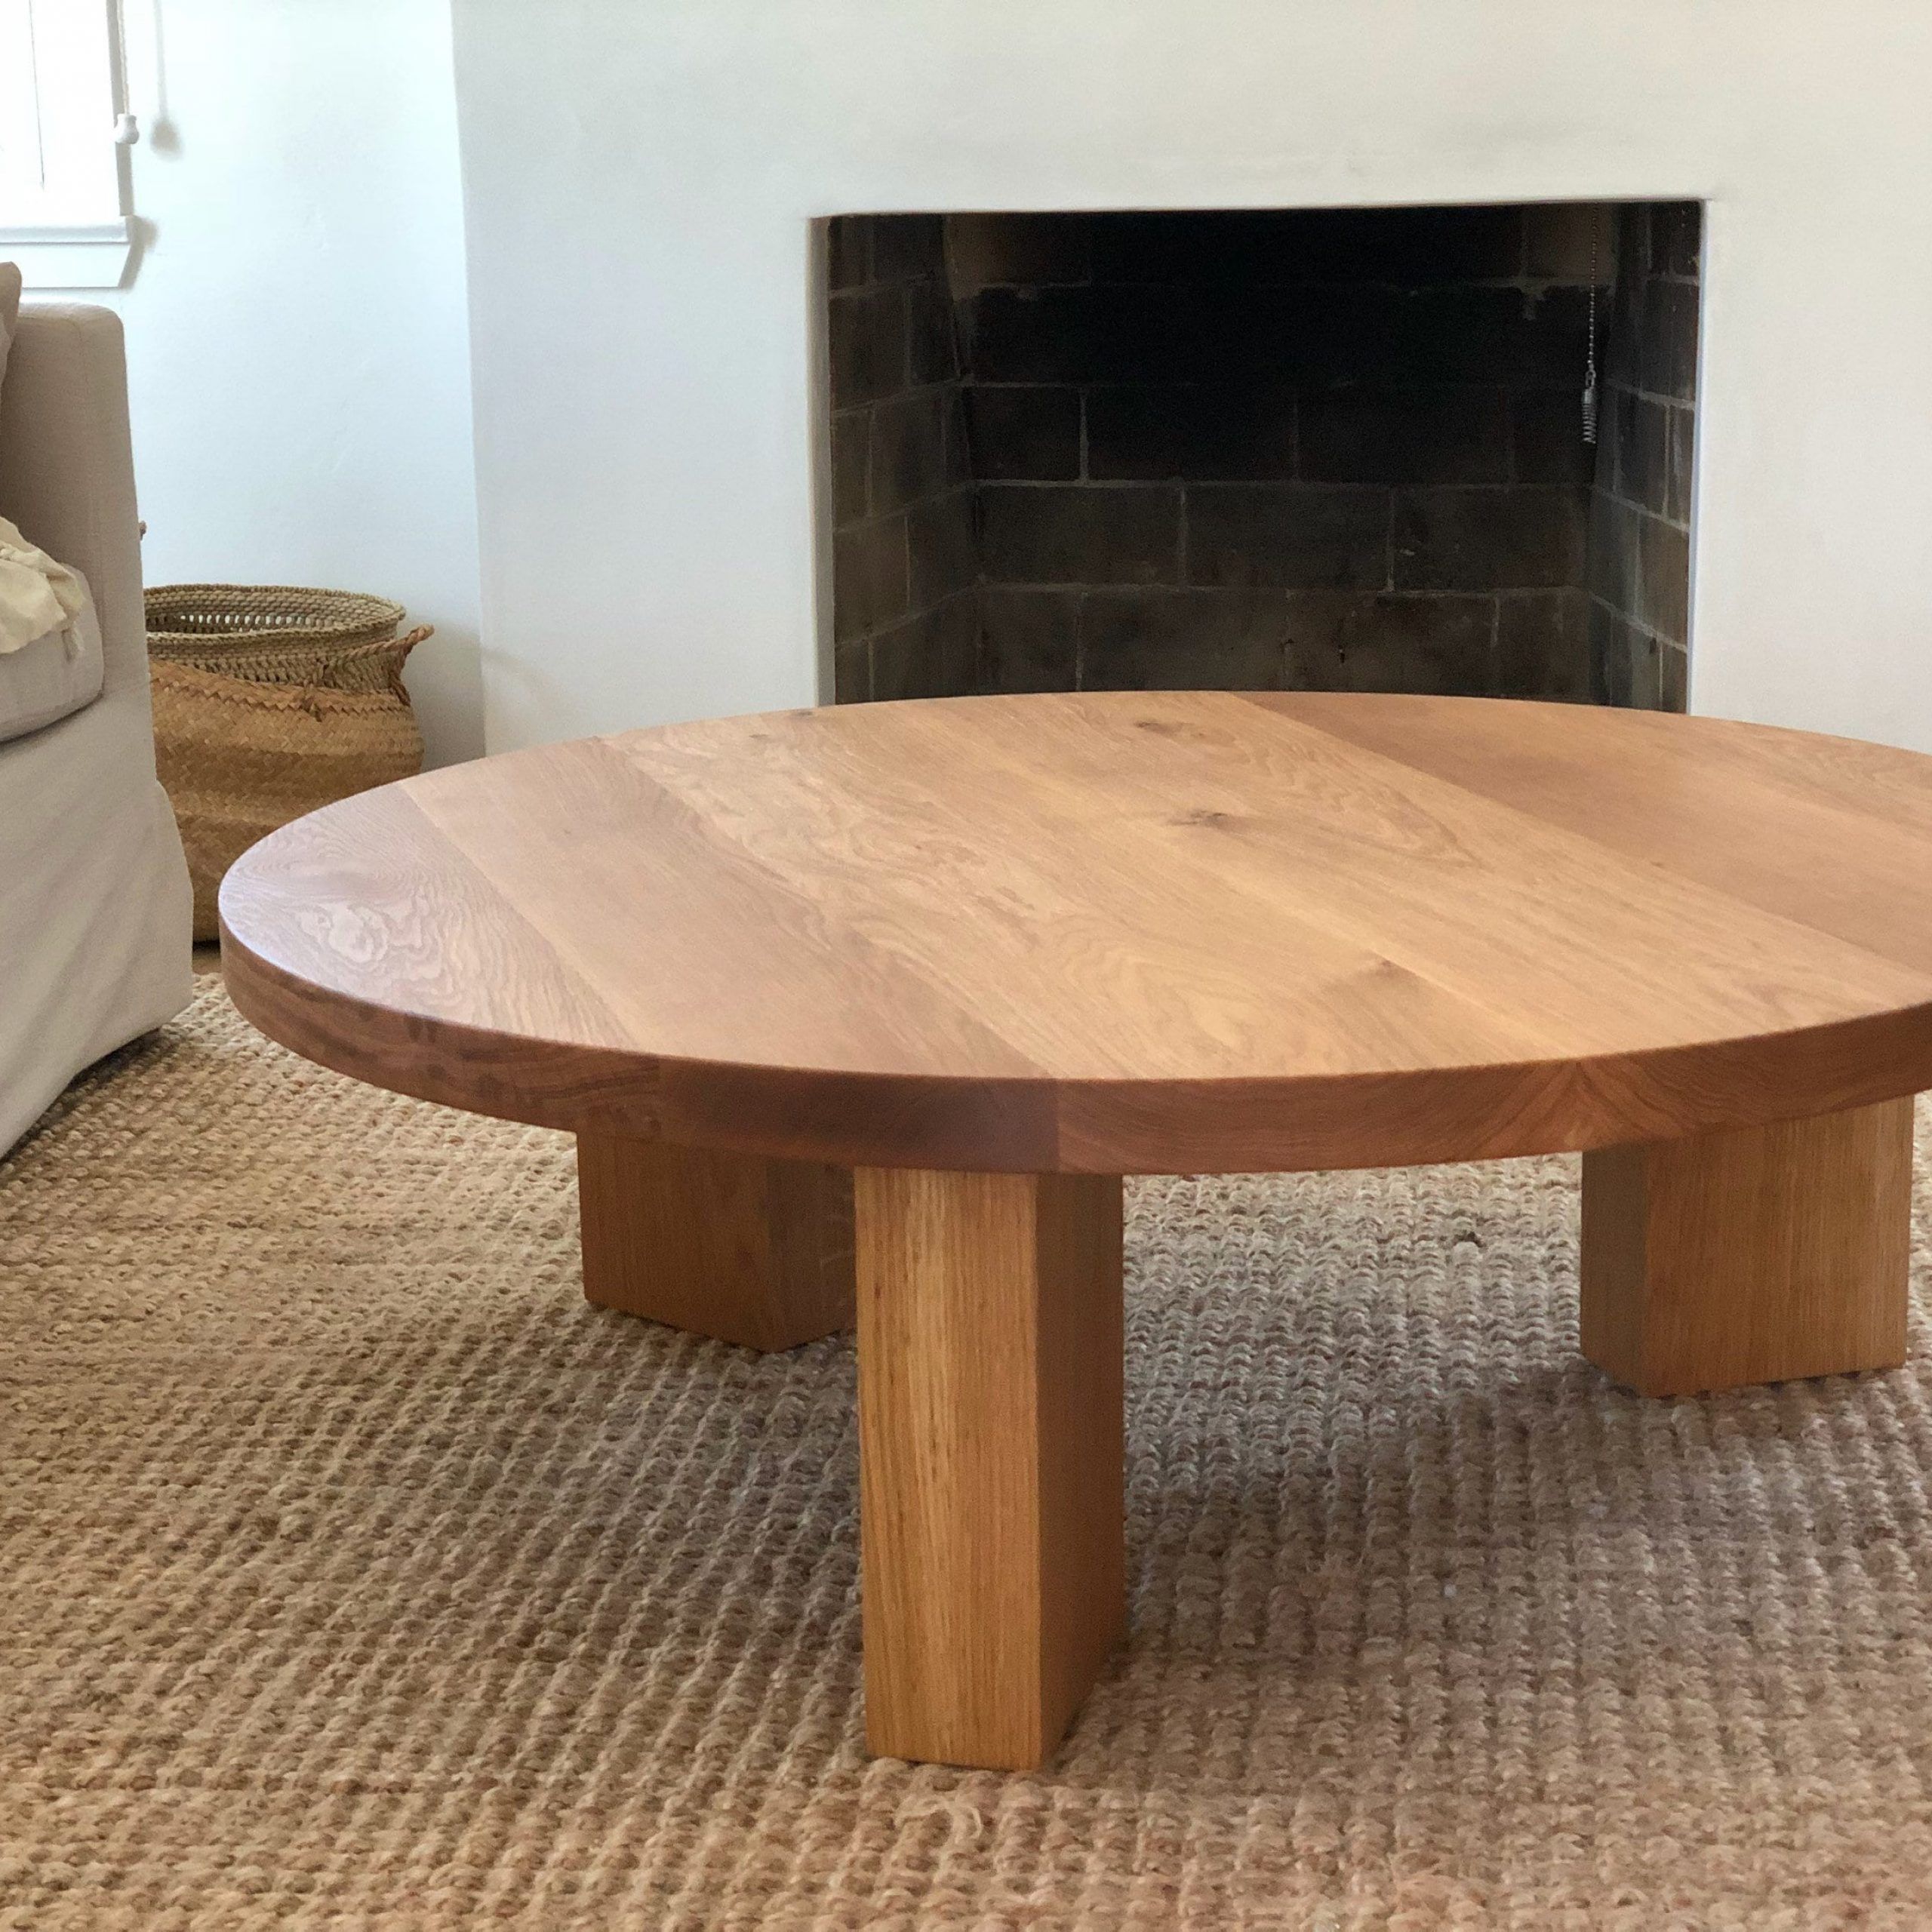 The Og 40 White Oak Modern Round 3 Leg Coffee Table – Etsy With 3 Leg Coffee Tables (View 1 of 15)